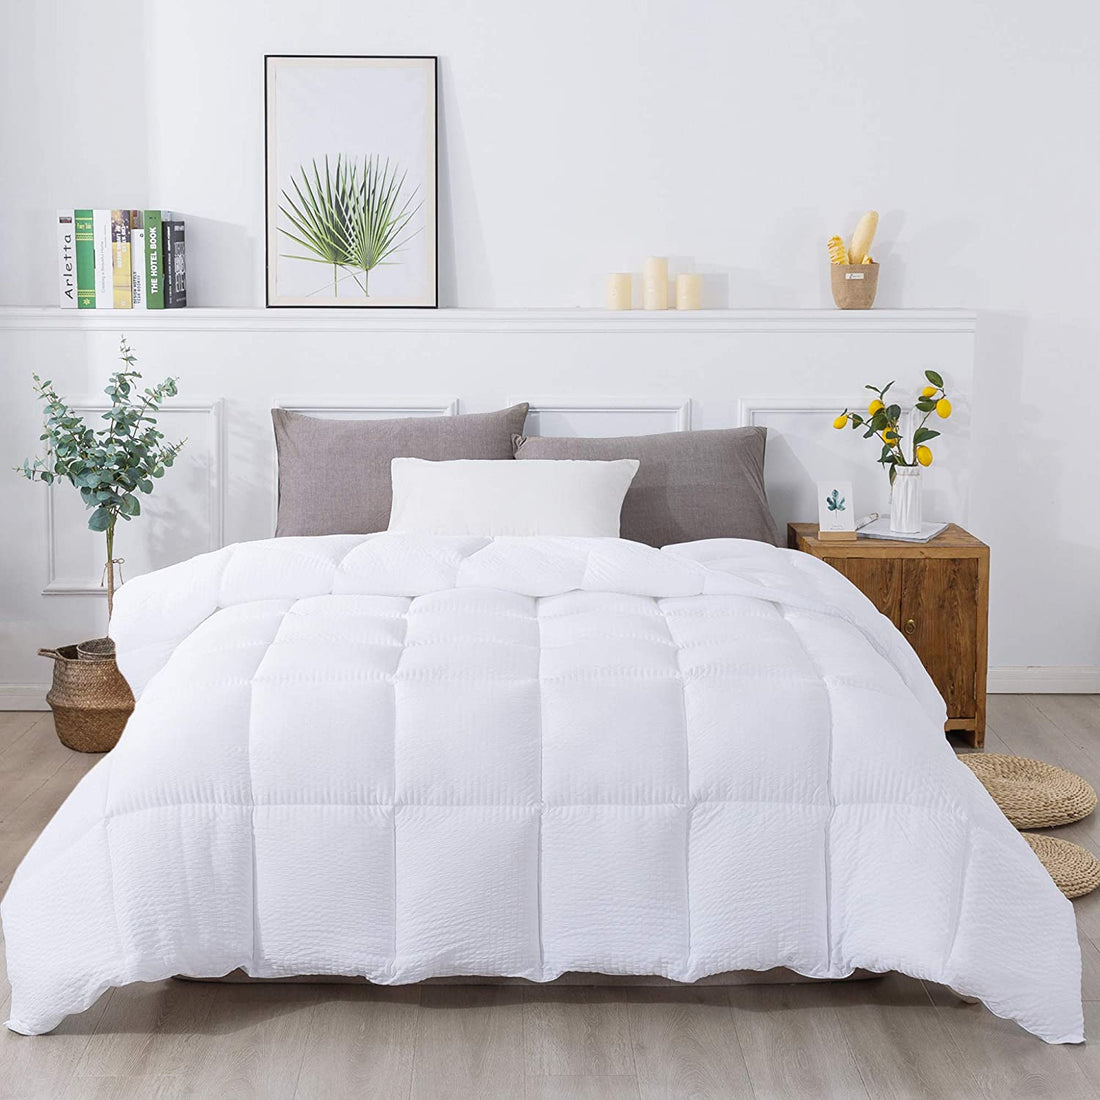 Why Home Bedding Should Promote Wellness